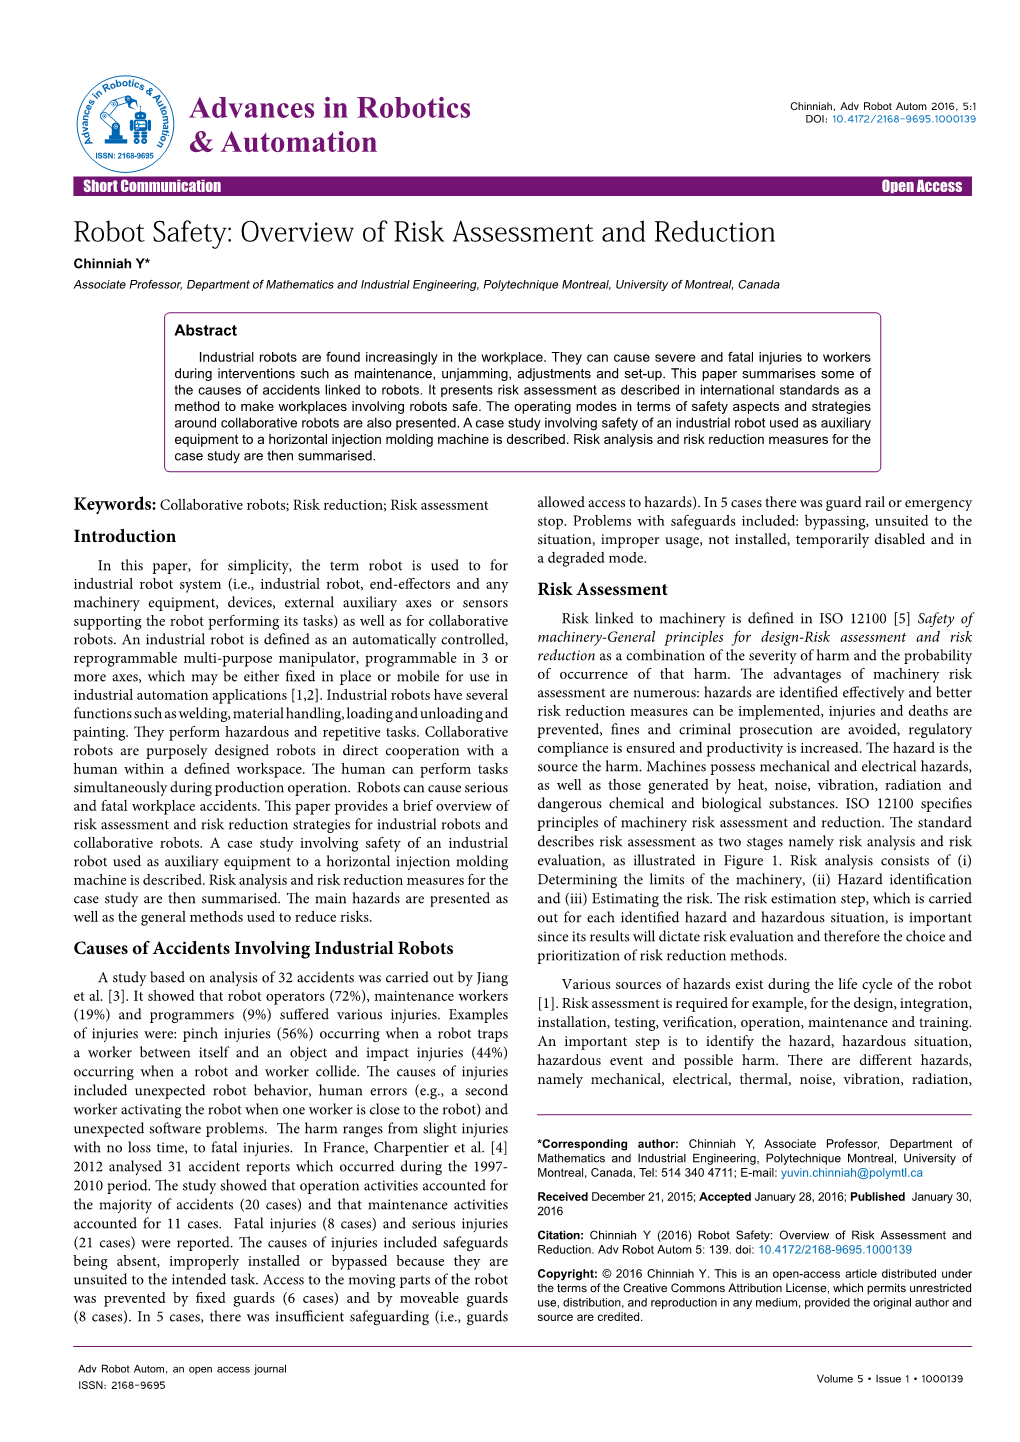 Robot Safety: Overview of Risk Assessment and Reduction